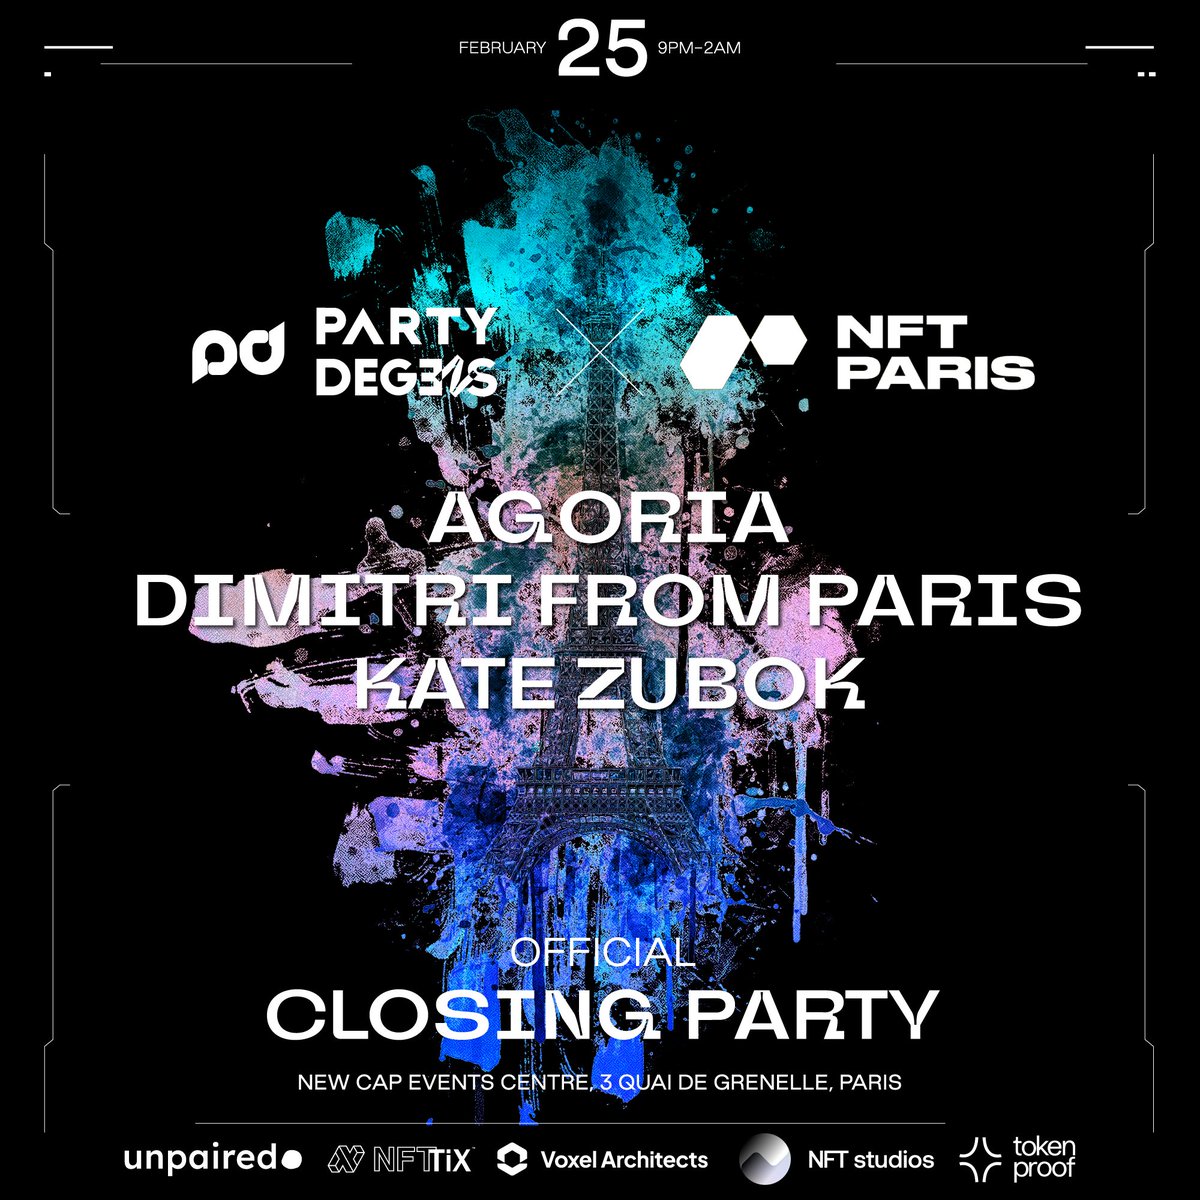 🎉🎧 The @nft_paris  Closing Party is just around the corner & the lineup is 🔥!

Get ready to dance the night away with disco-house legend Dimitri from Paris, web3 favourite Agoria, and rising star Kate Zubok! 

#LFP #NFTParis #ClosingParty #DimitriFromParis #Agoria #KateZubok